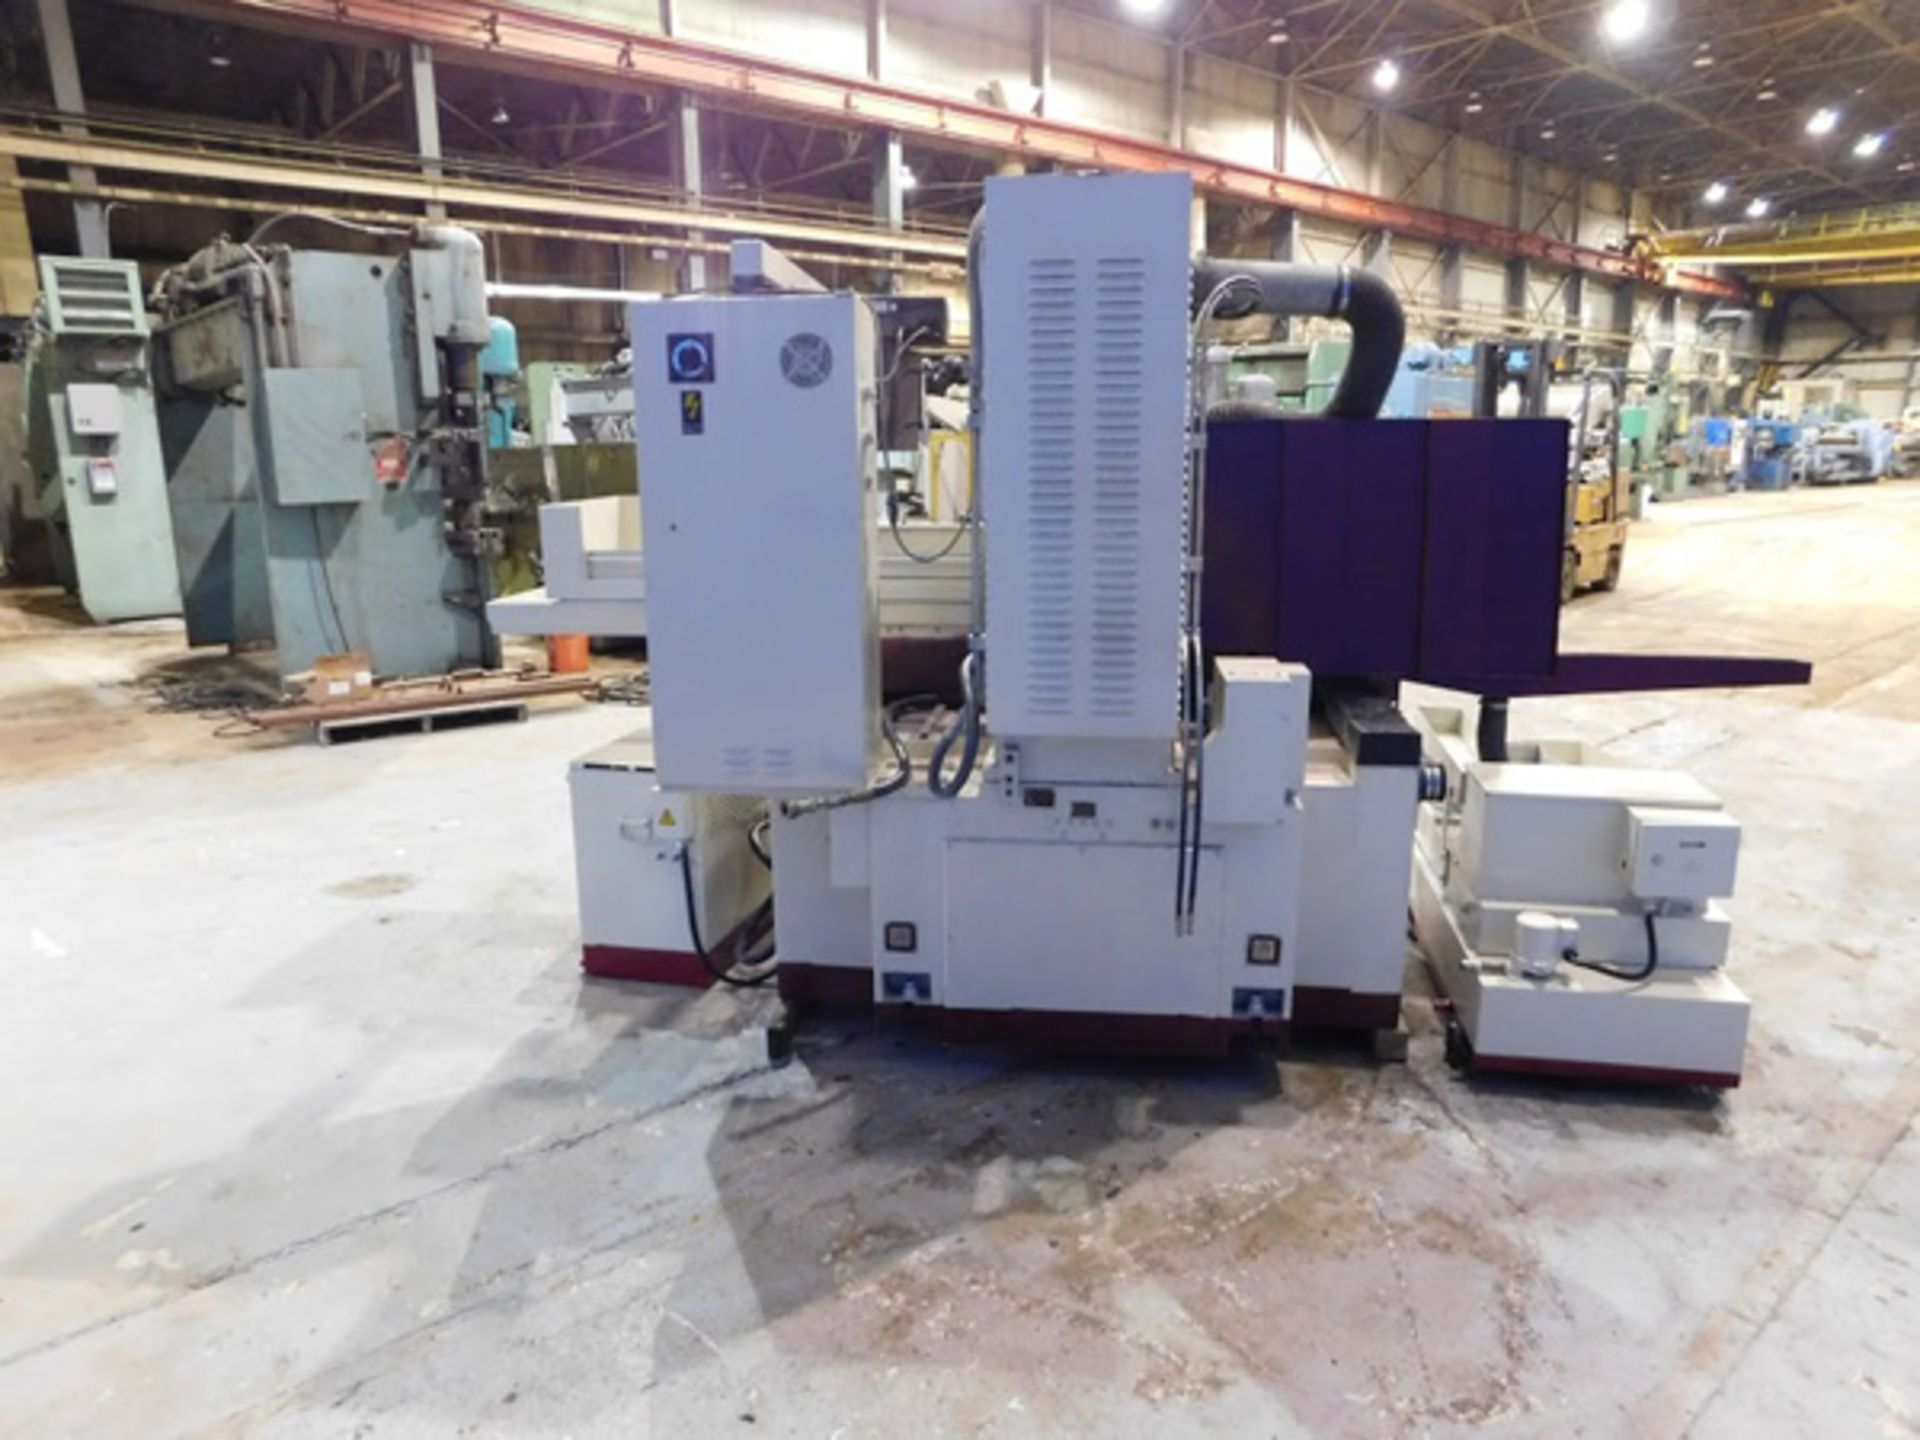 Chevalier Automatic Surface Grinder | 16" x 40", Mdl: FSG-1640AD, S/N: N/A - 7048P - Image 6 of 11